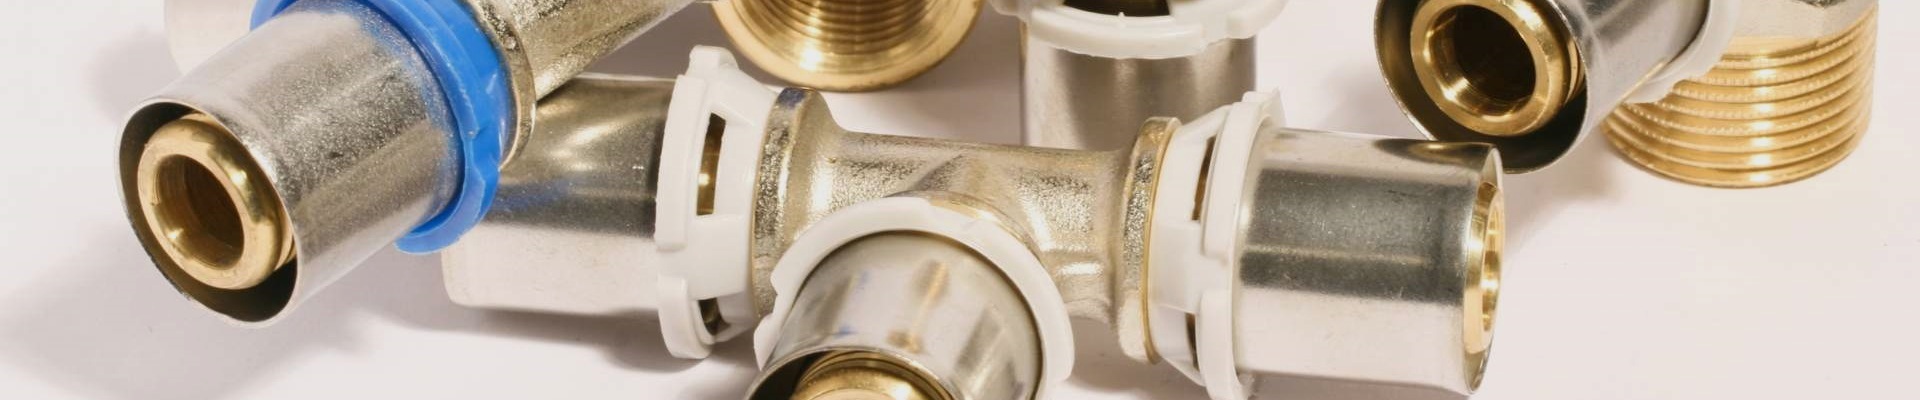 Request Service Plumbers Arlesey, SG15